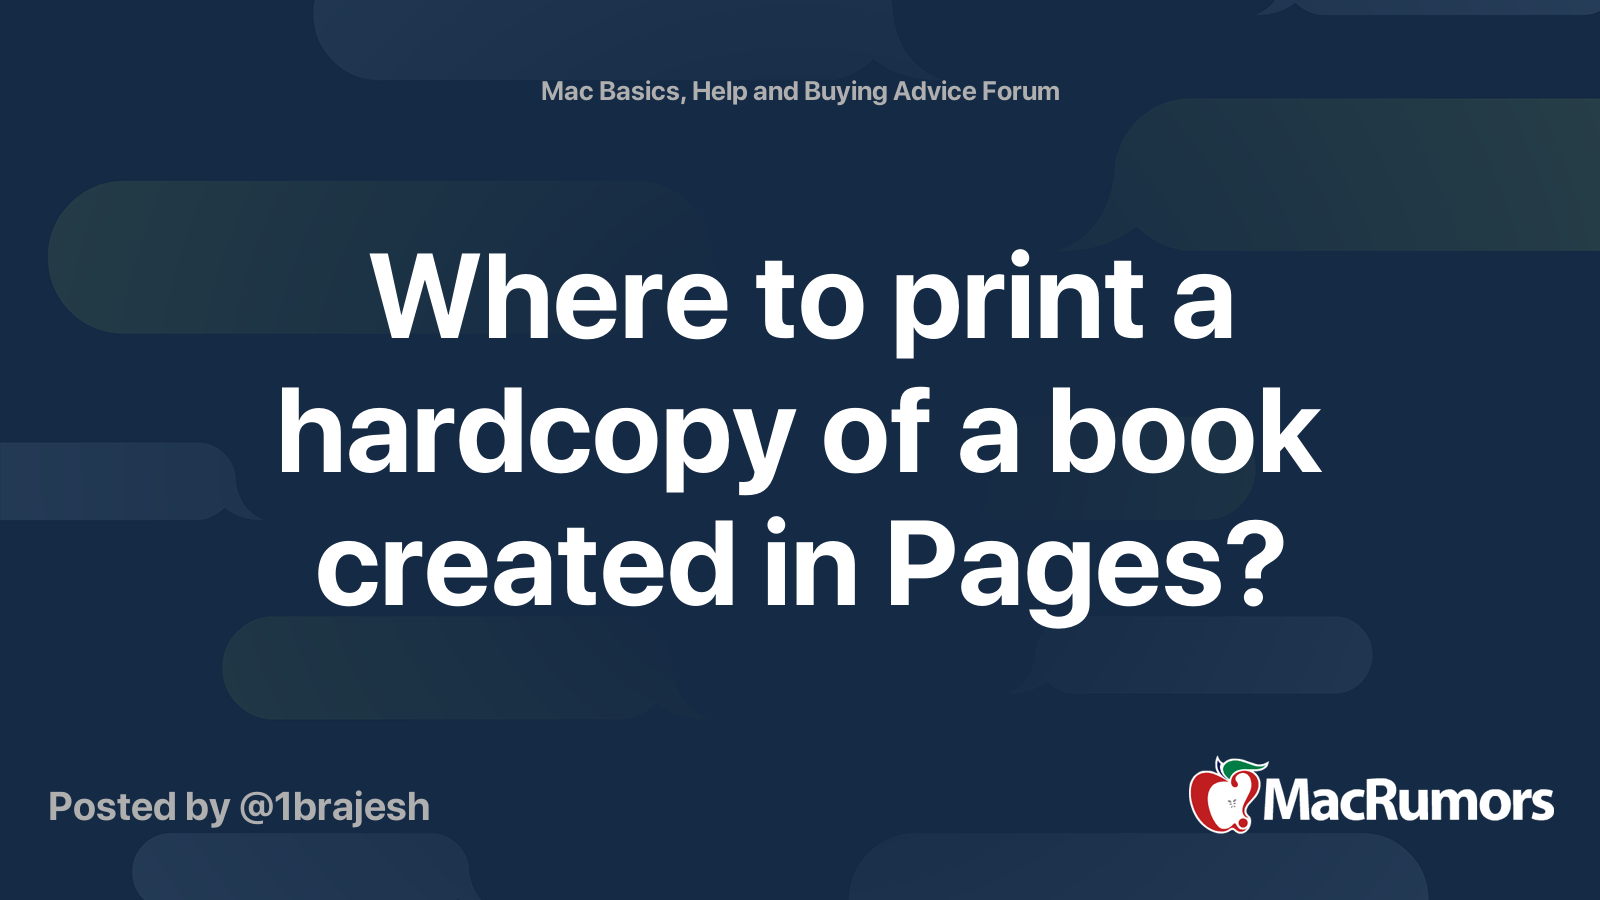 where-to-print-a-hardcopy-of-a-book-created-in-pages-macrumors-forums